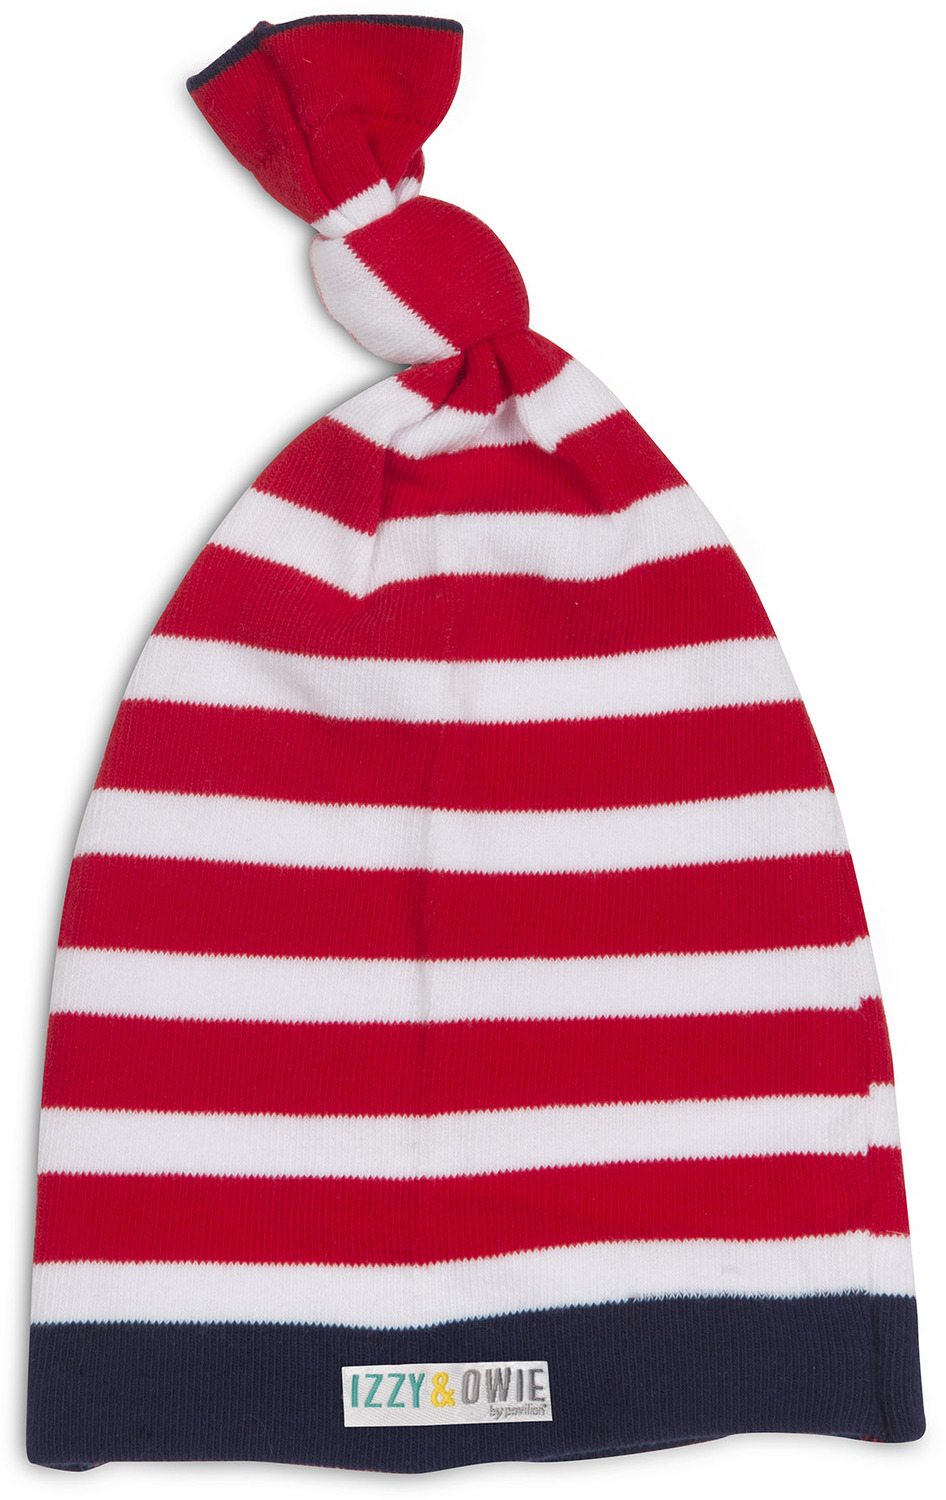 Red and Navy Stripe by Izzy & Owie - Red and Navy Stripe - One Size Fits All Baby Hat